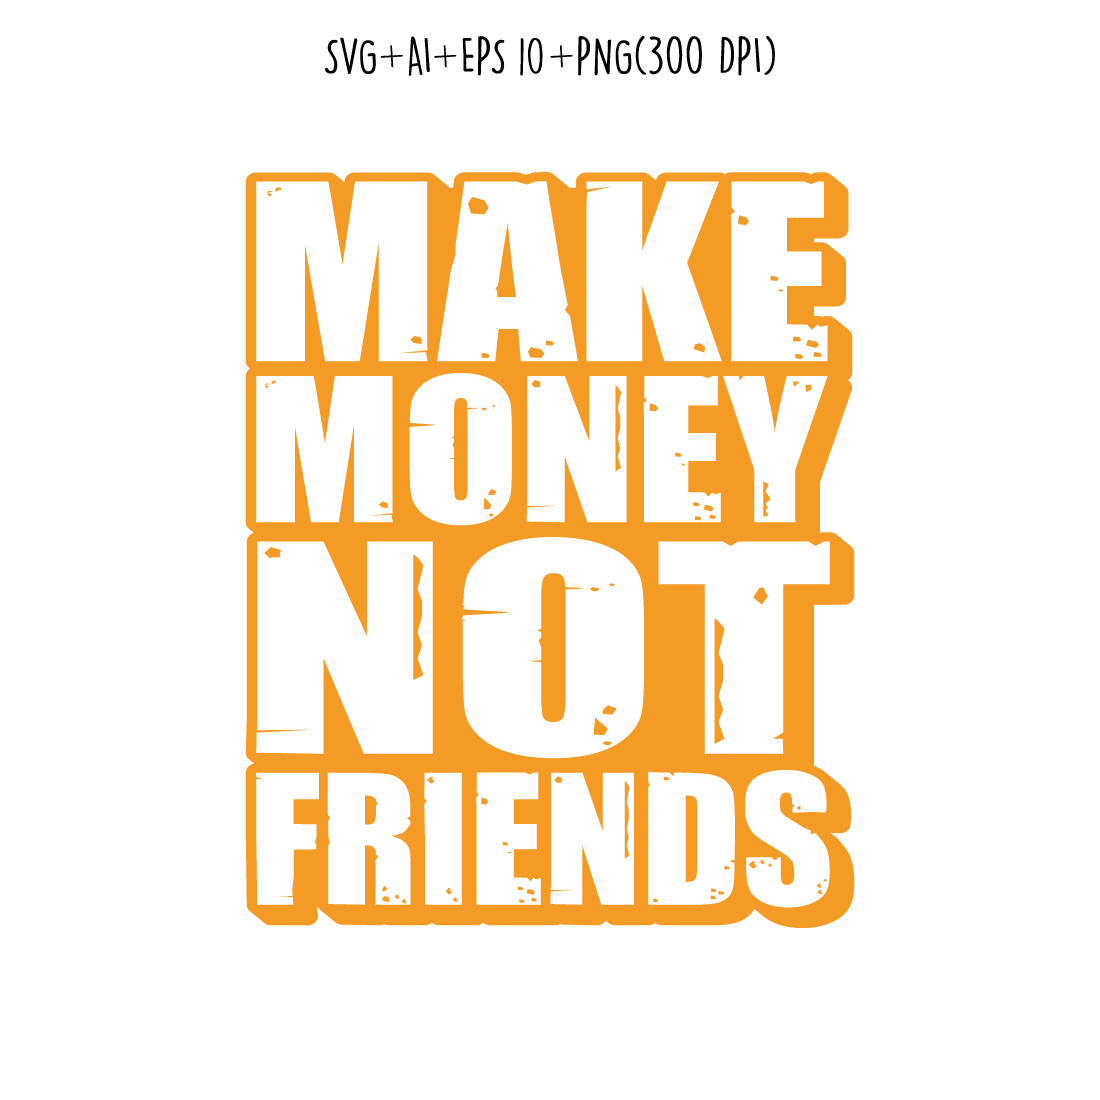 Make money not friends motivational quote typography for Tshirt design, mug, print preview image.